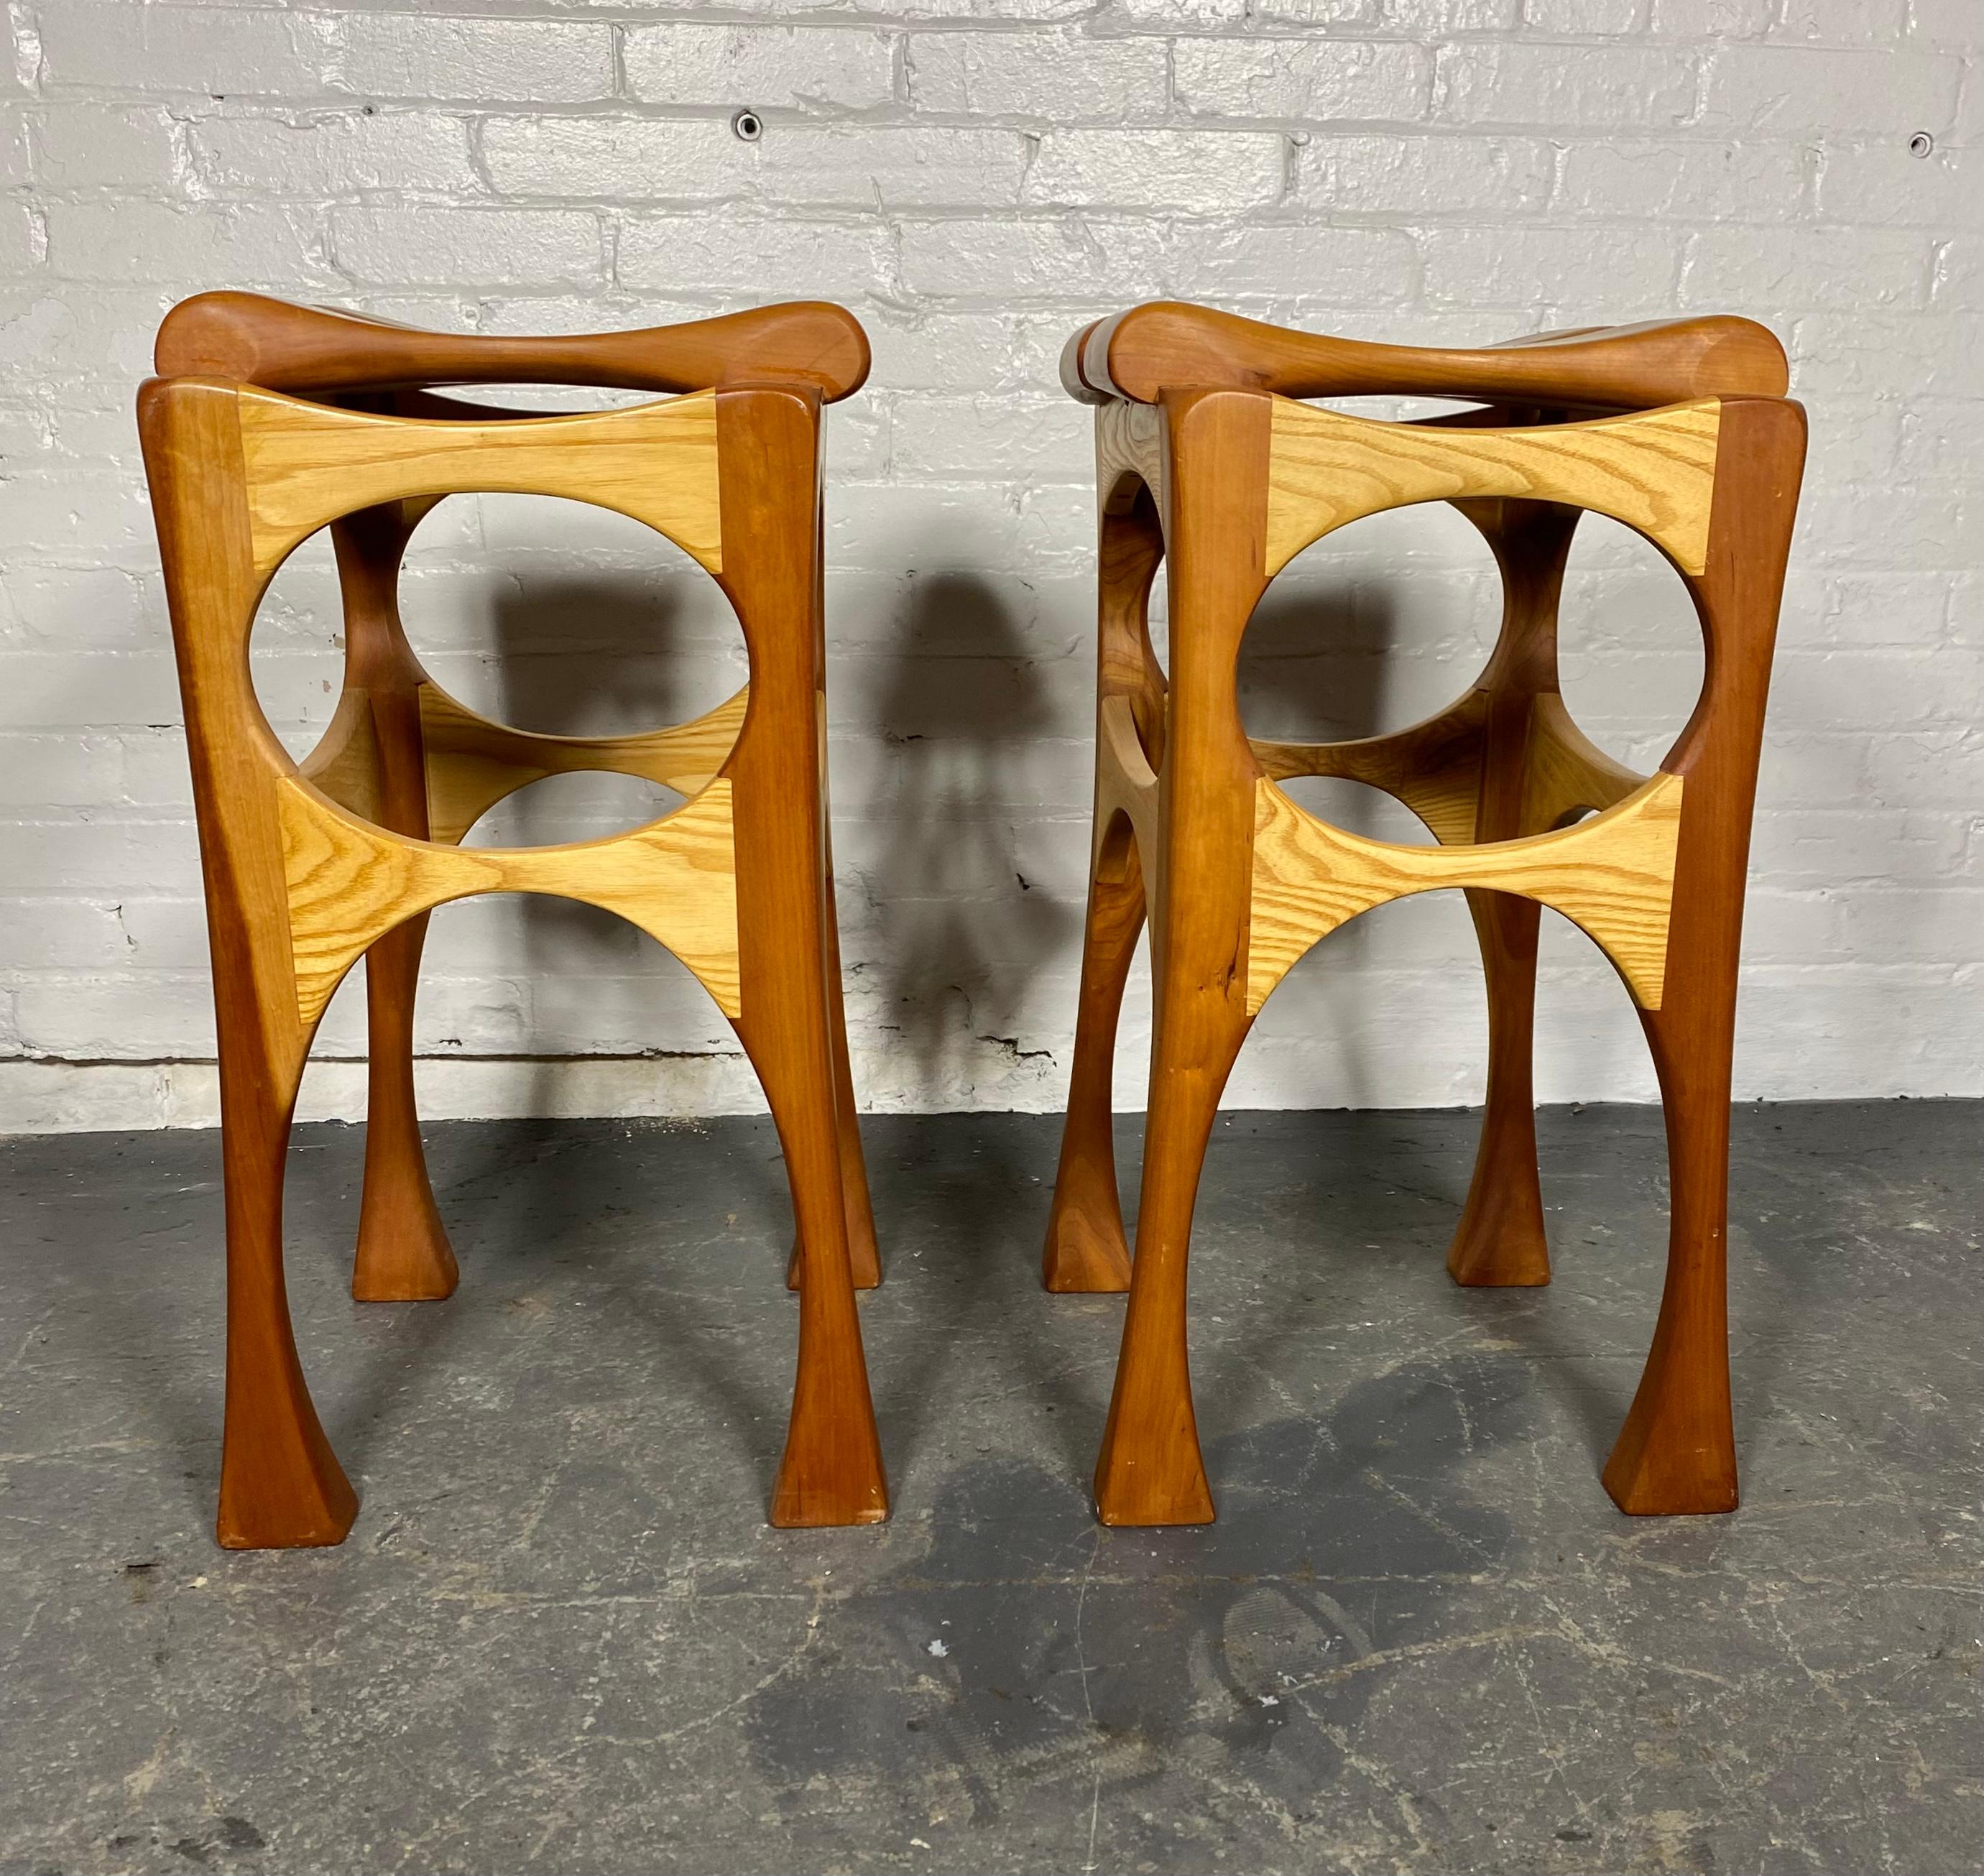 Hand Crafted Bespoke Workshop/Studio Stools.  2-tone birch and cherry  For Sale 2